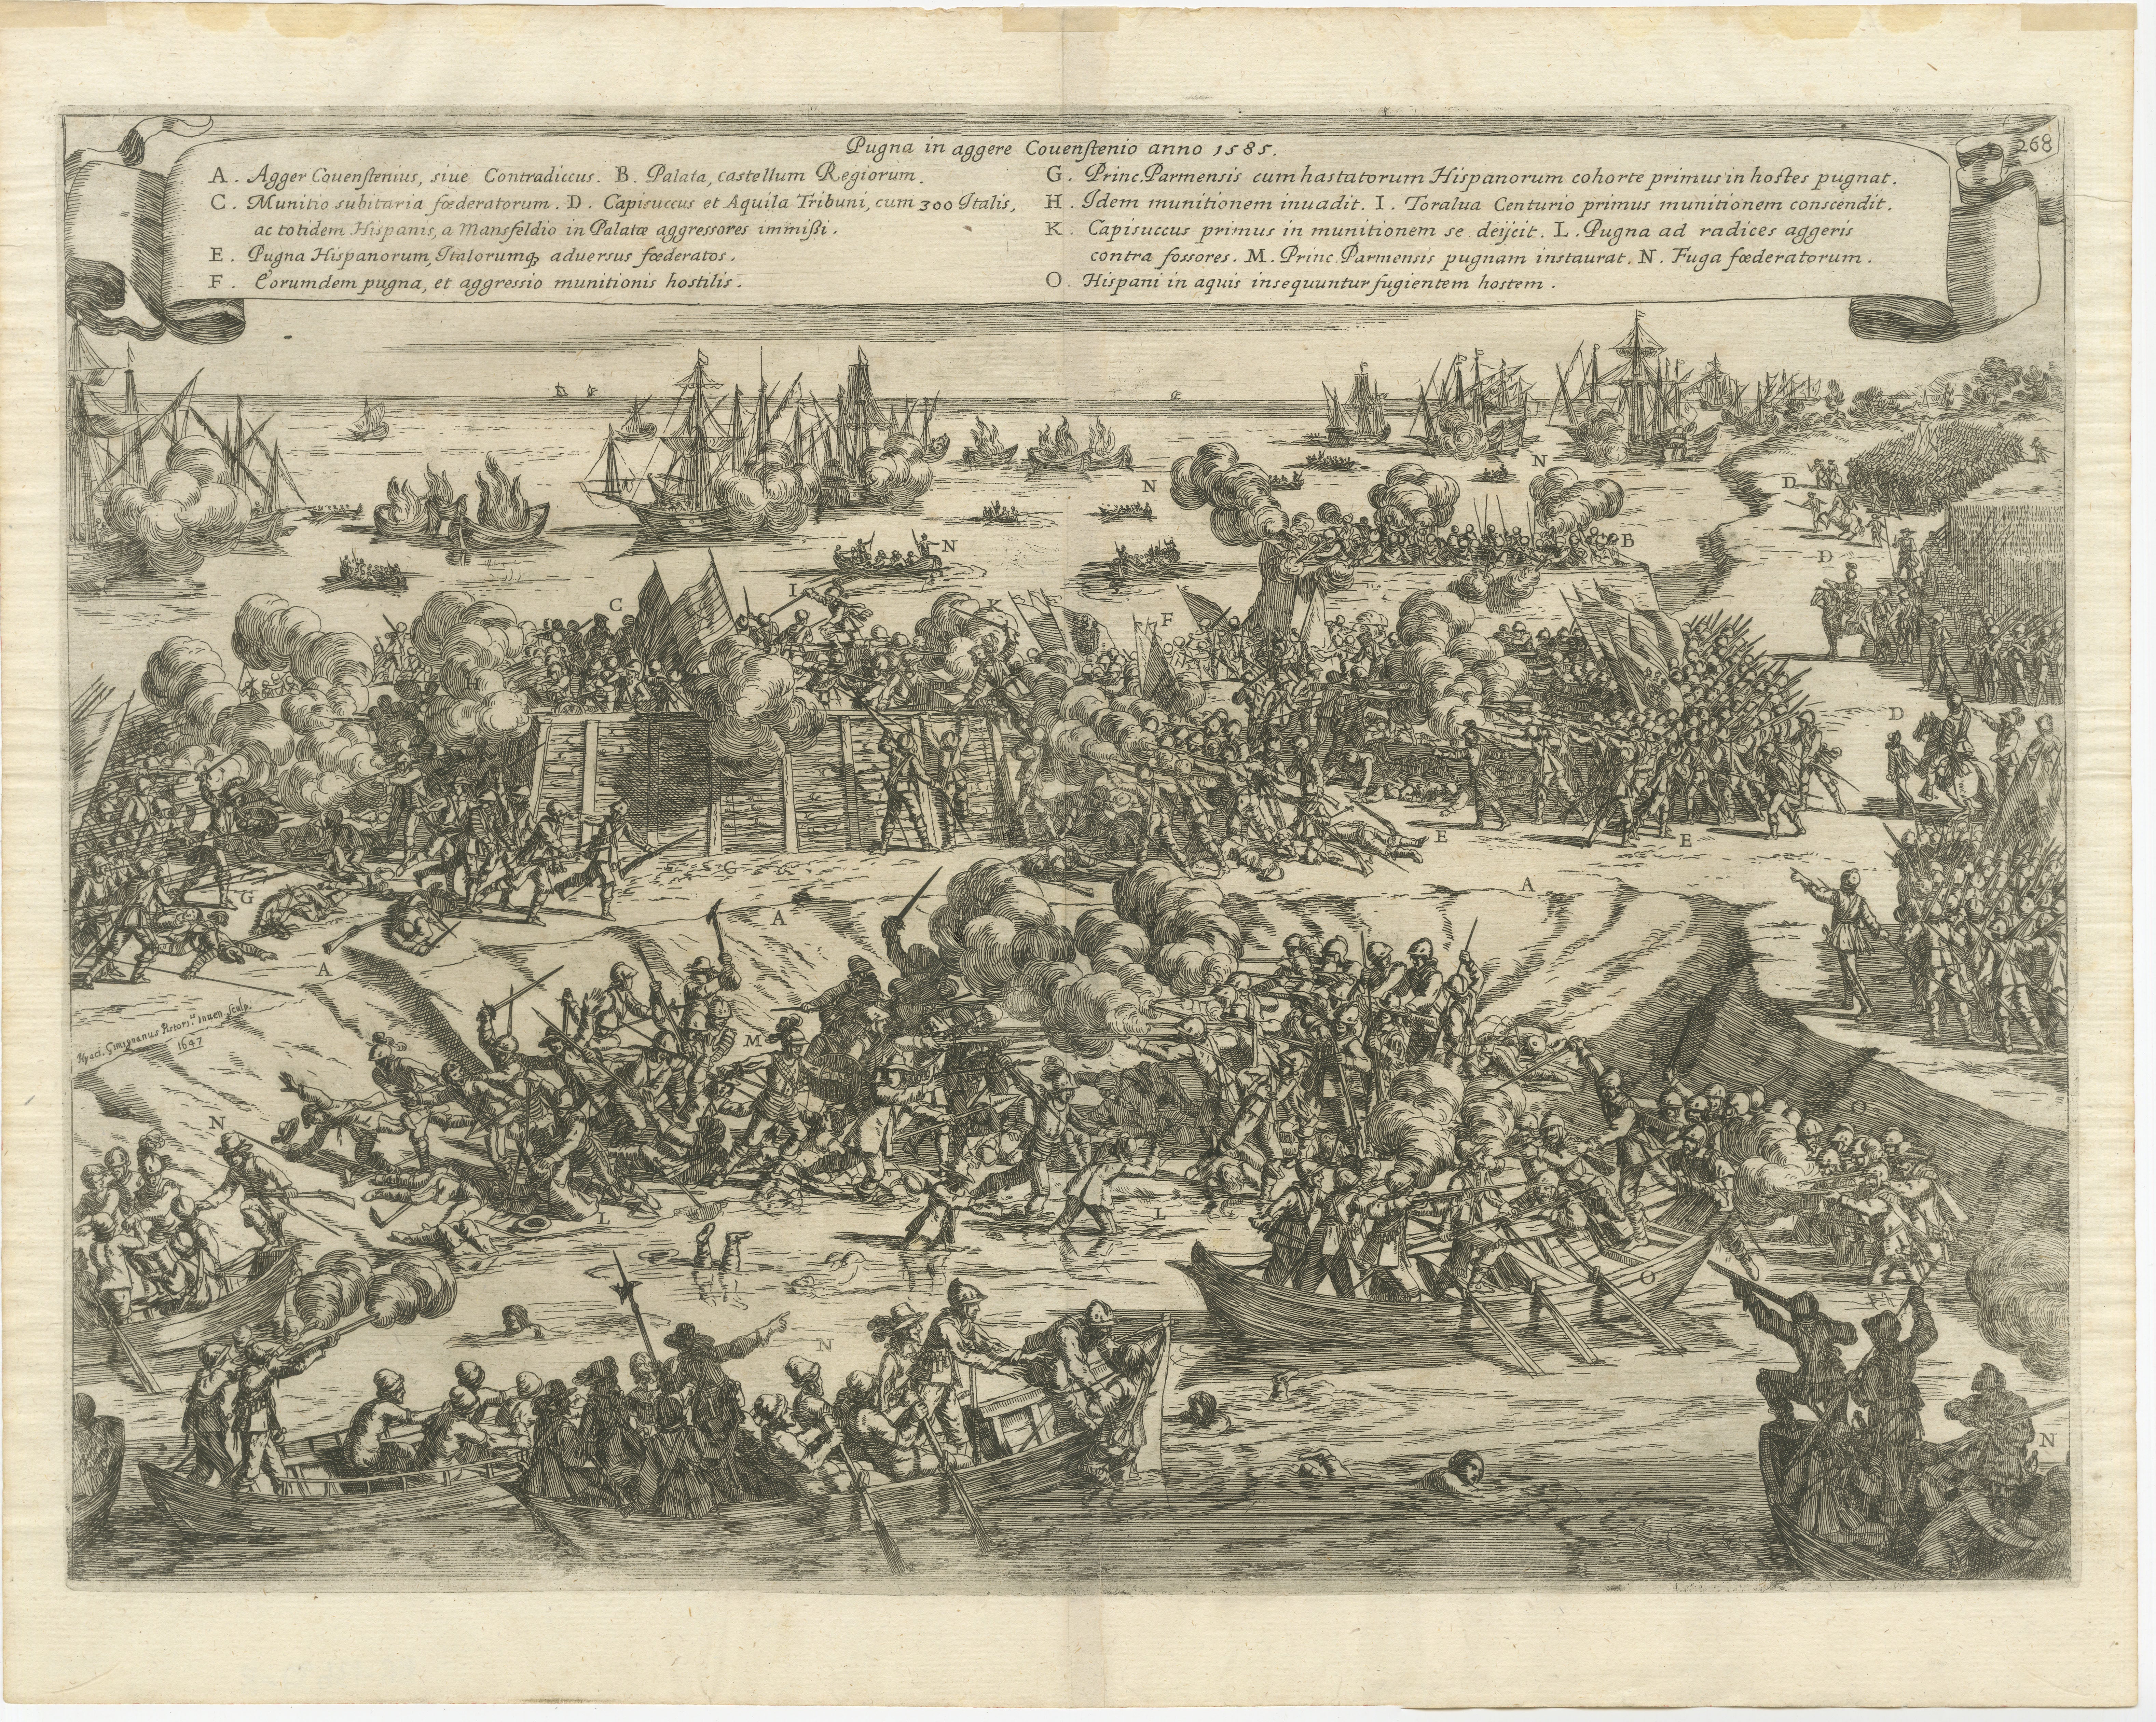 Battle on the Kauwensteinse dike, 26 mai 1585, attack from the Staten army and ships from Sealand on the dike against the Spanish in the Eighty Years' War.

An original historical artwork depicting the Battle of 'Kauwenstein (Dutch)' or Covenstein